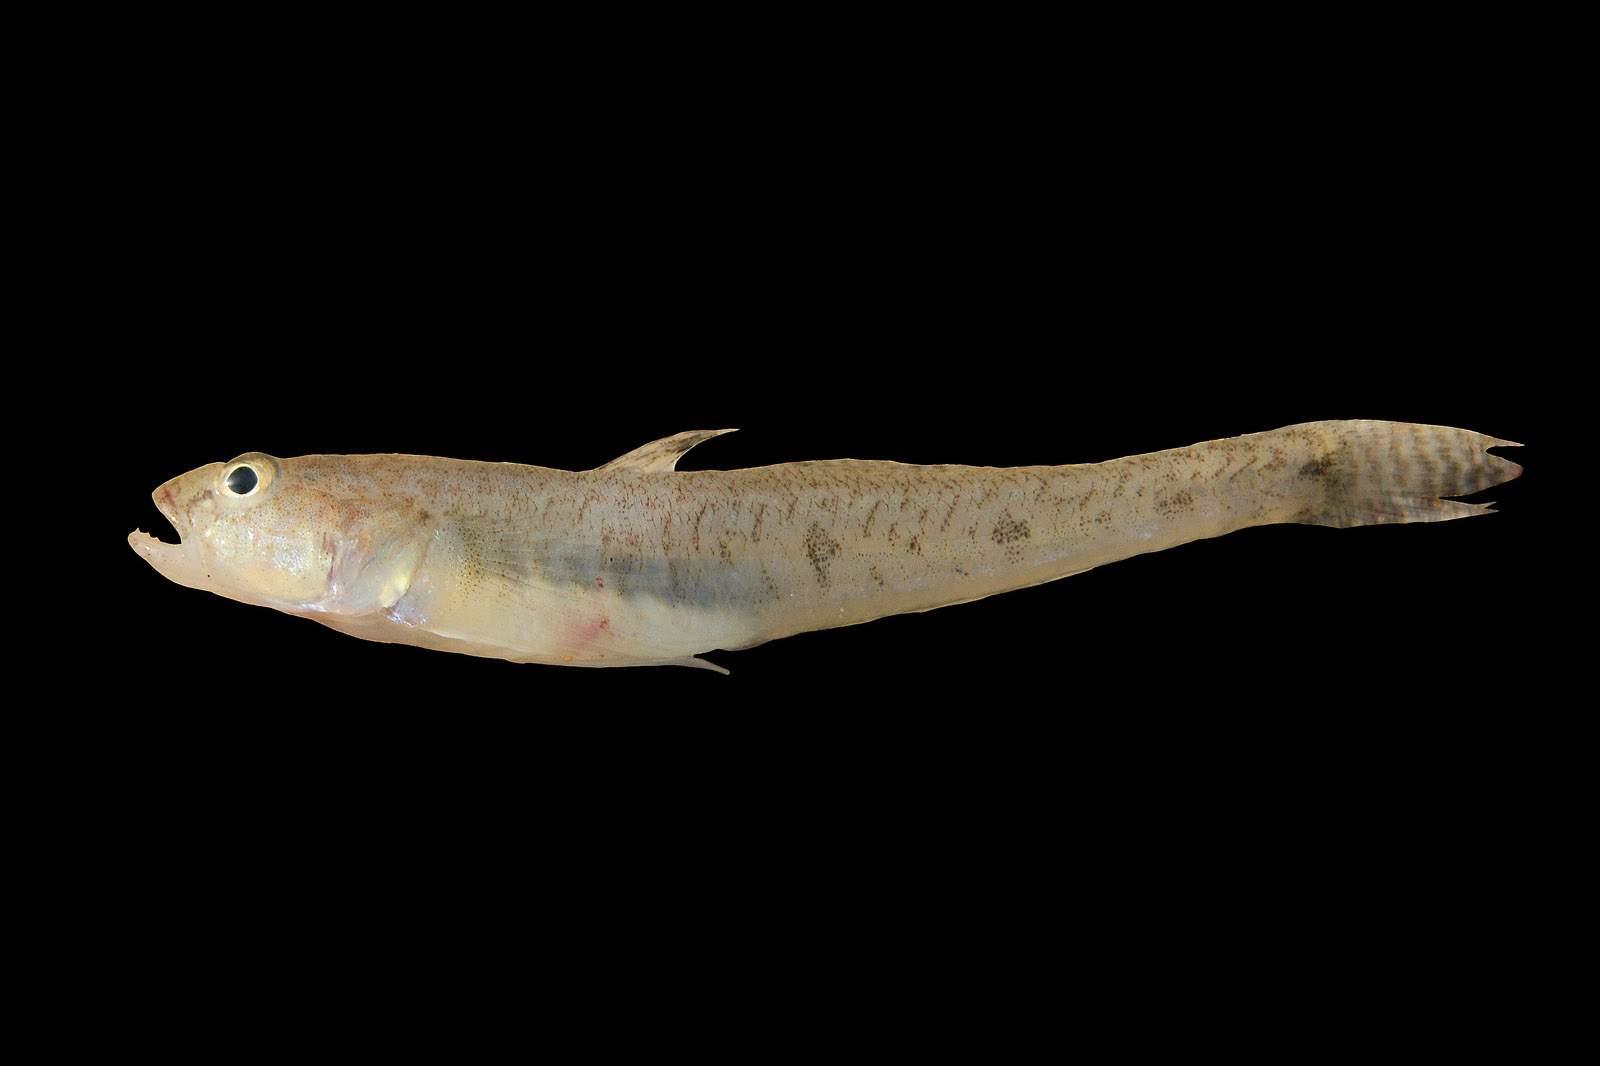 A  length-wise shot of a sand goby that is tan in color. Its mouth is wide open. The background is all black.